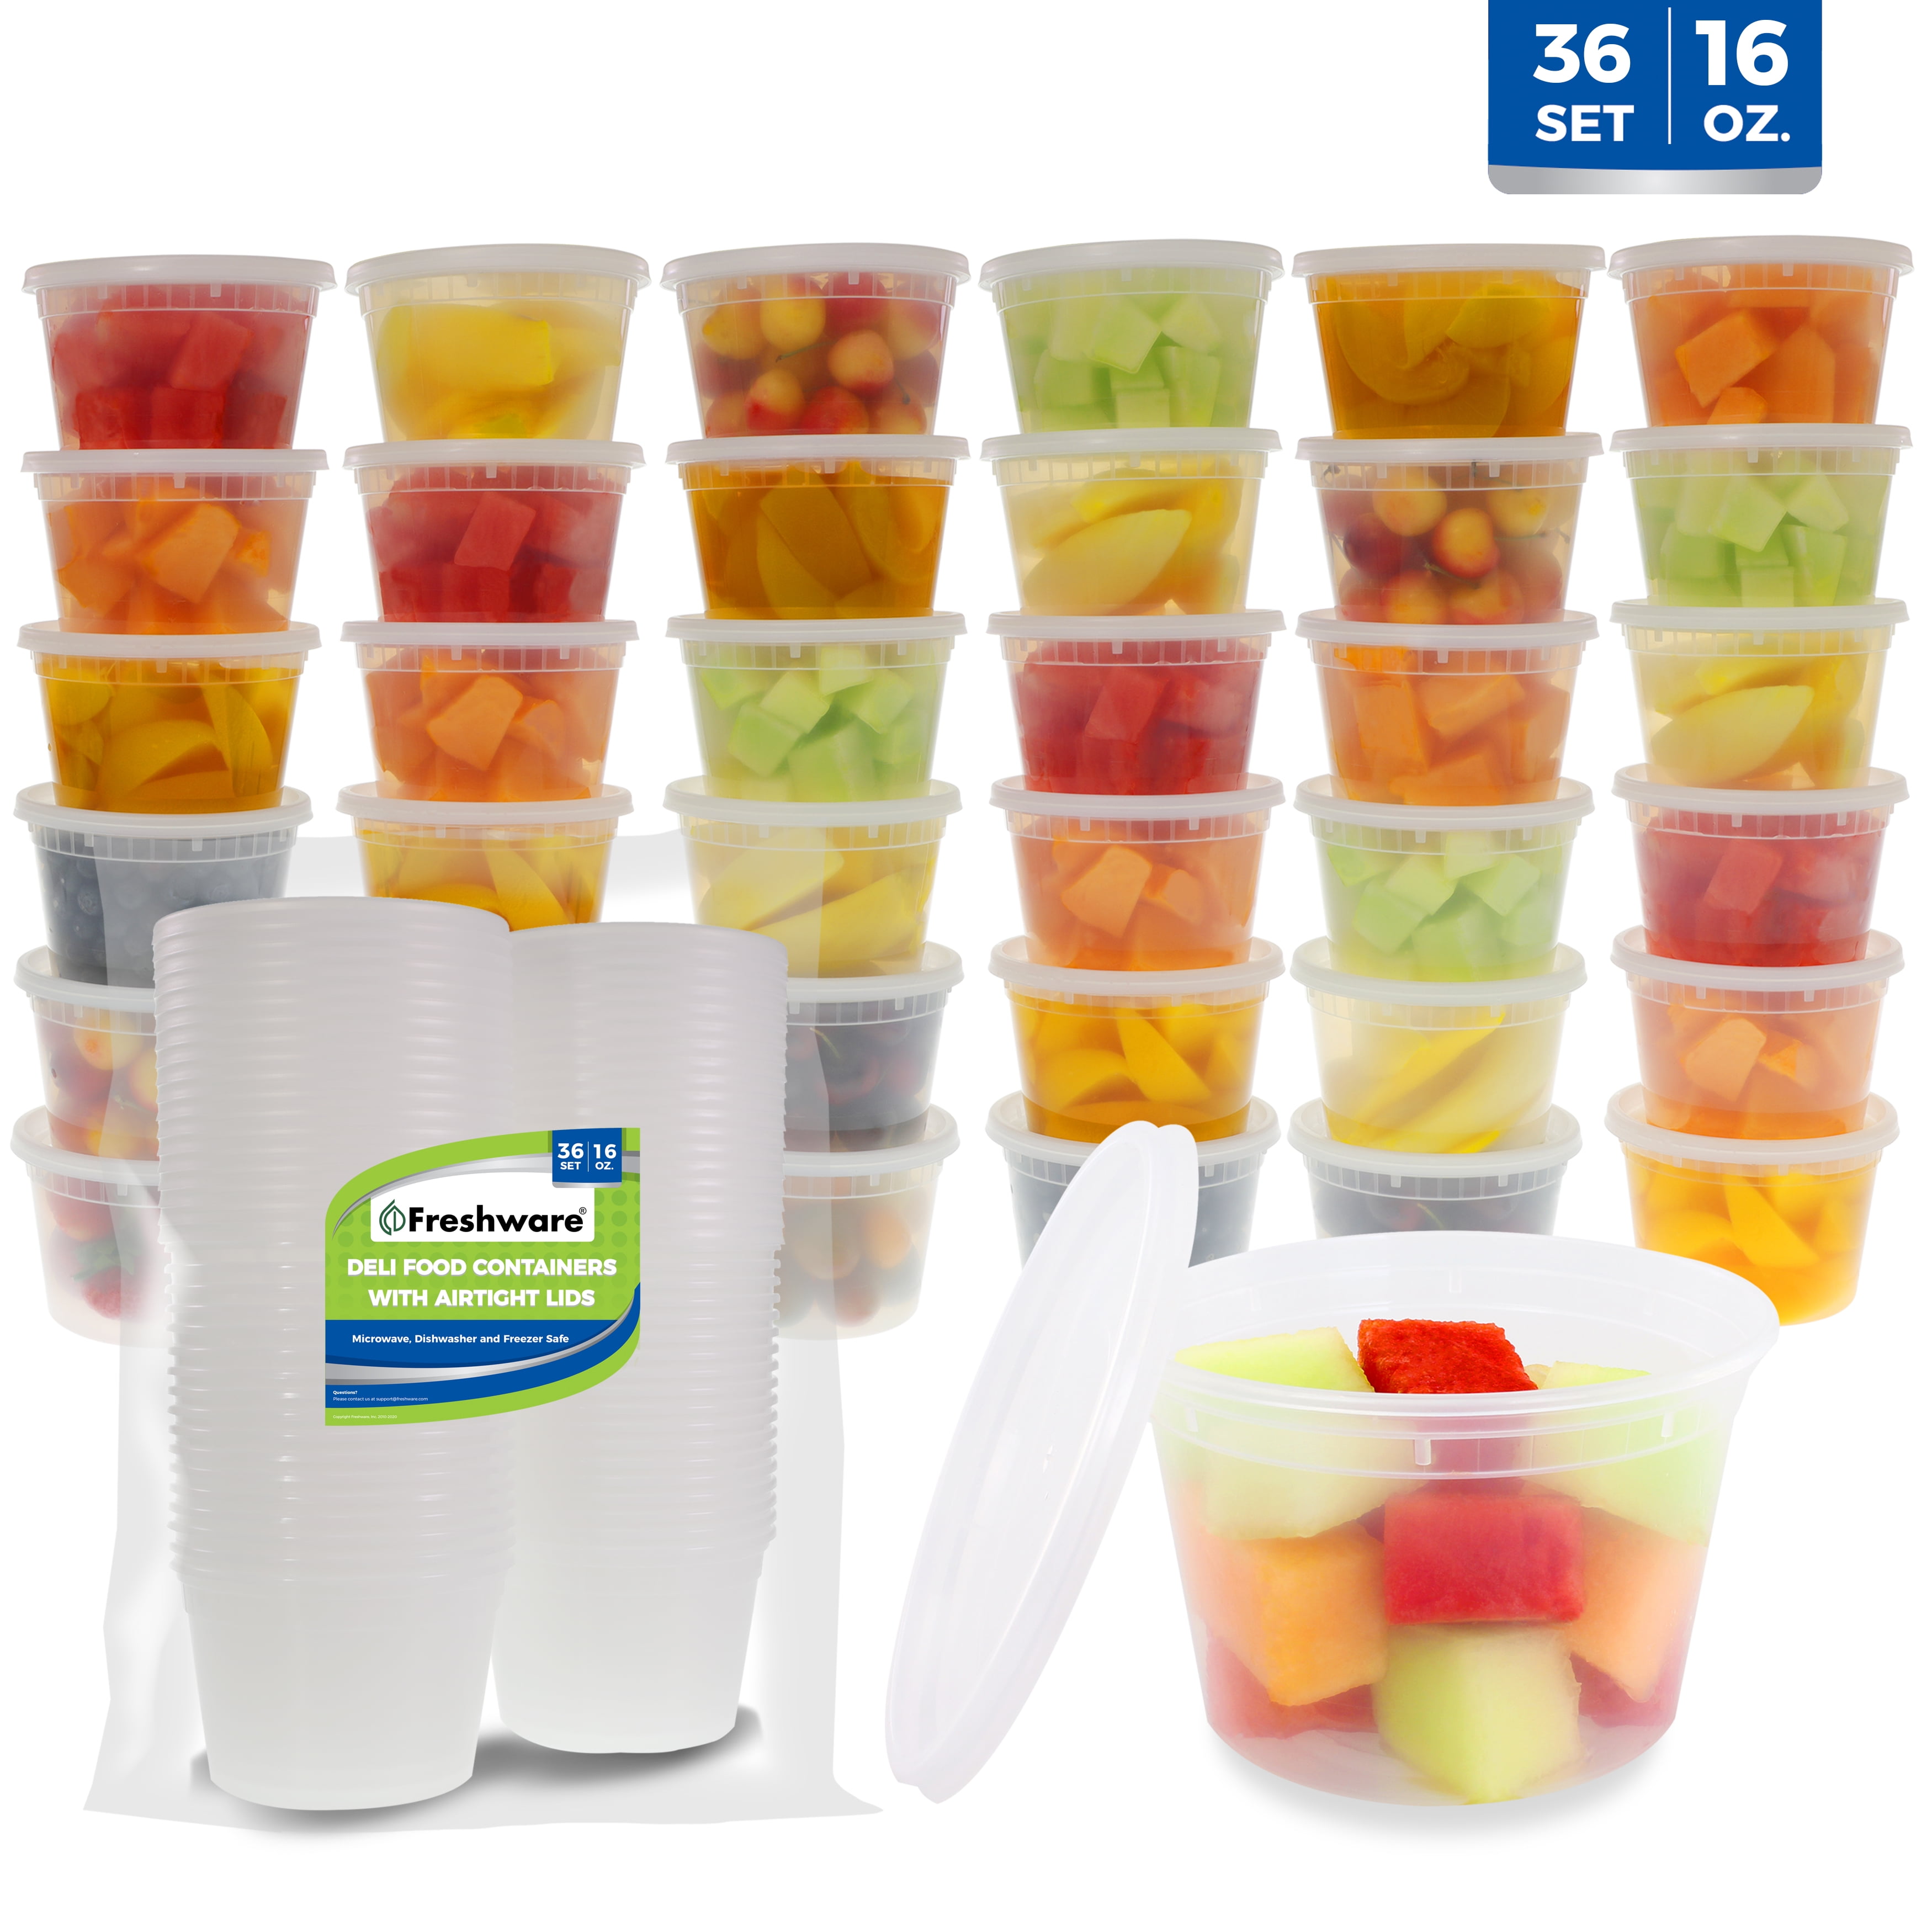 Supreme Select Deli Plastic Storage Containers with Lids [24 pack] 8 Oz -  Reusable Food Containers for Home & Business - Microwave & Freezer friendly  - Dishwasher safe - Secure & Tight fitting Covers - Yahoo Shopping